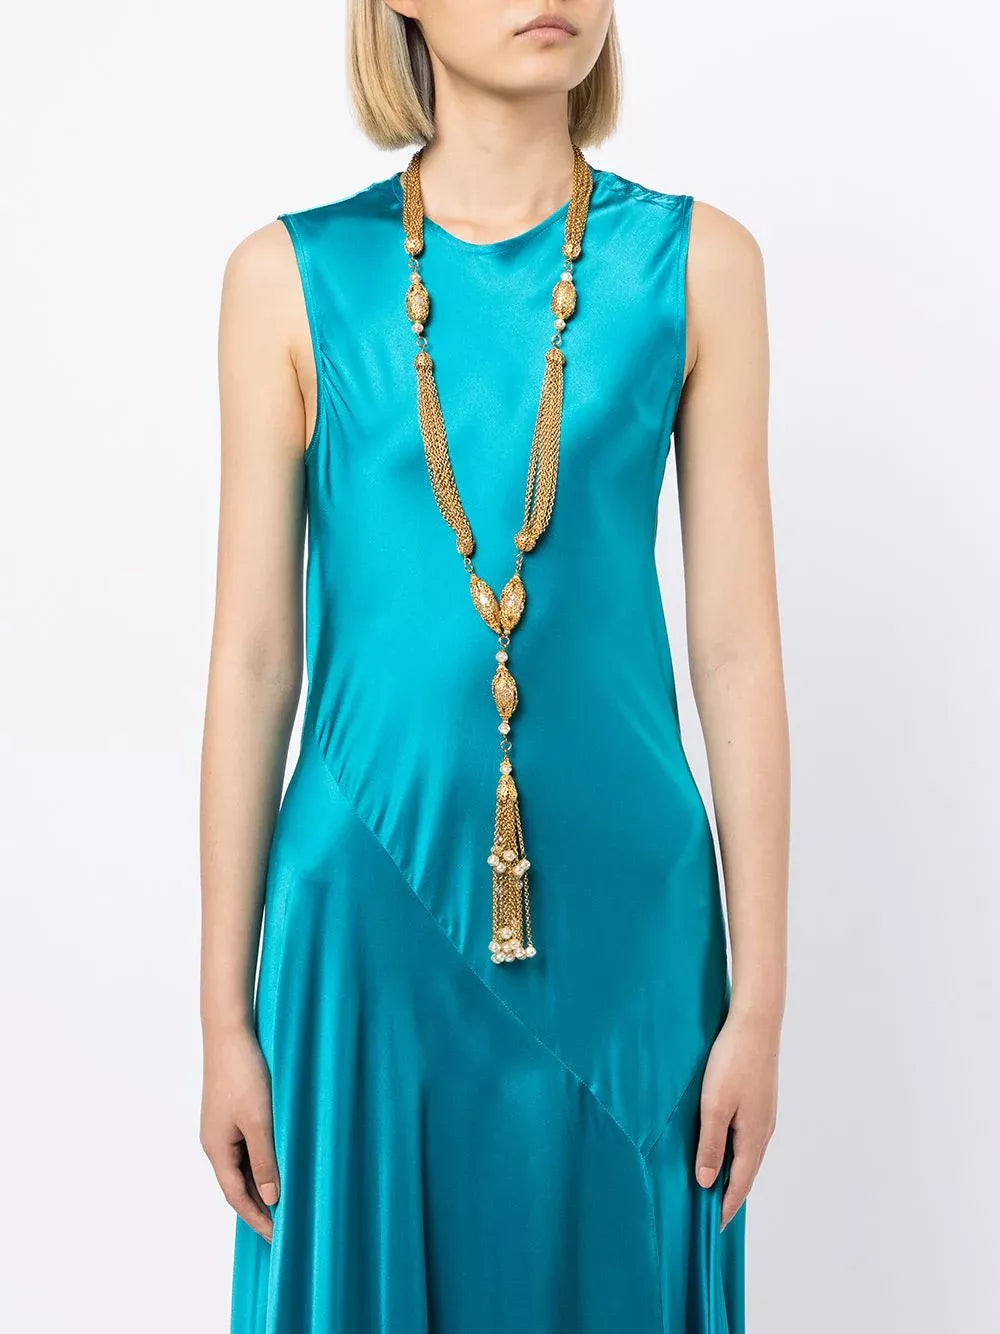 Pearl-Embellished Multi-Chain Necklace - Rewind Vintage Affairs